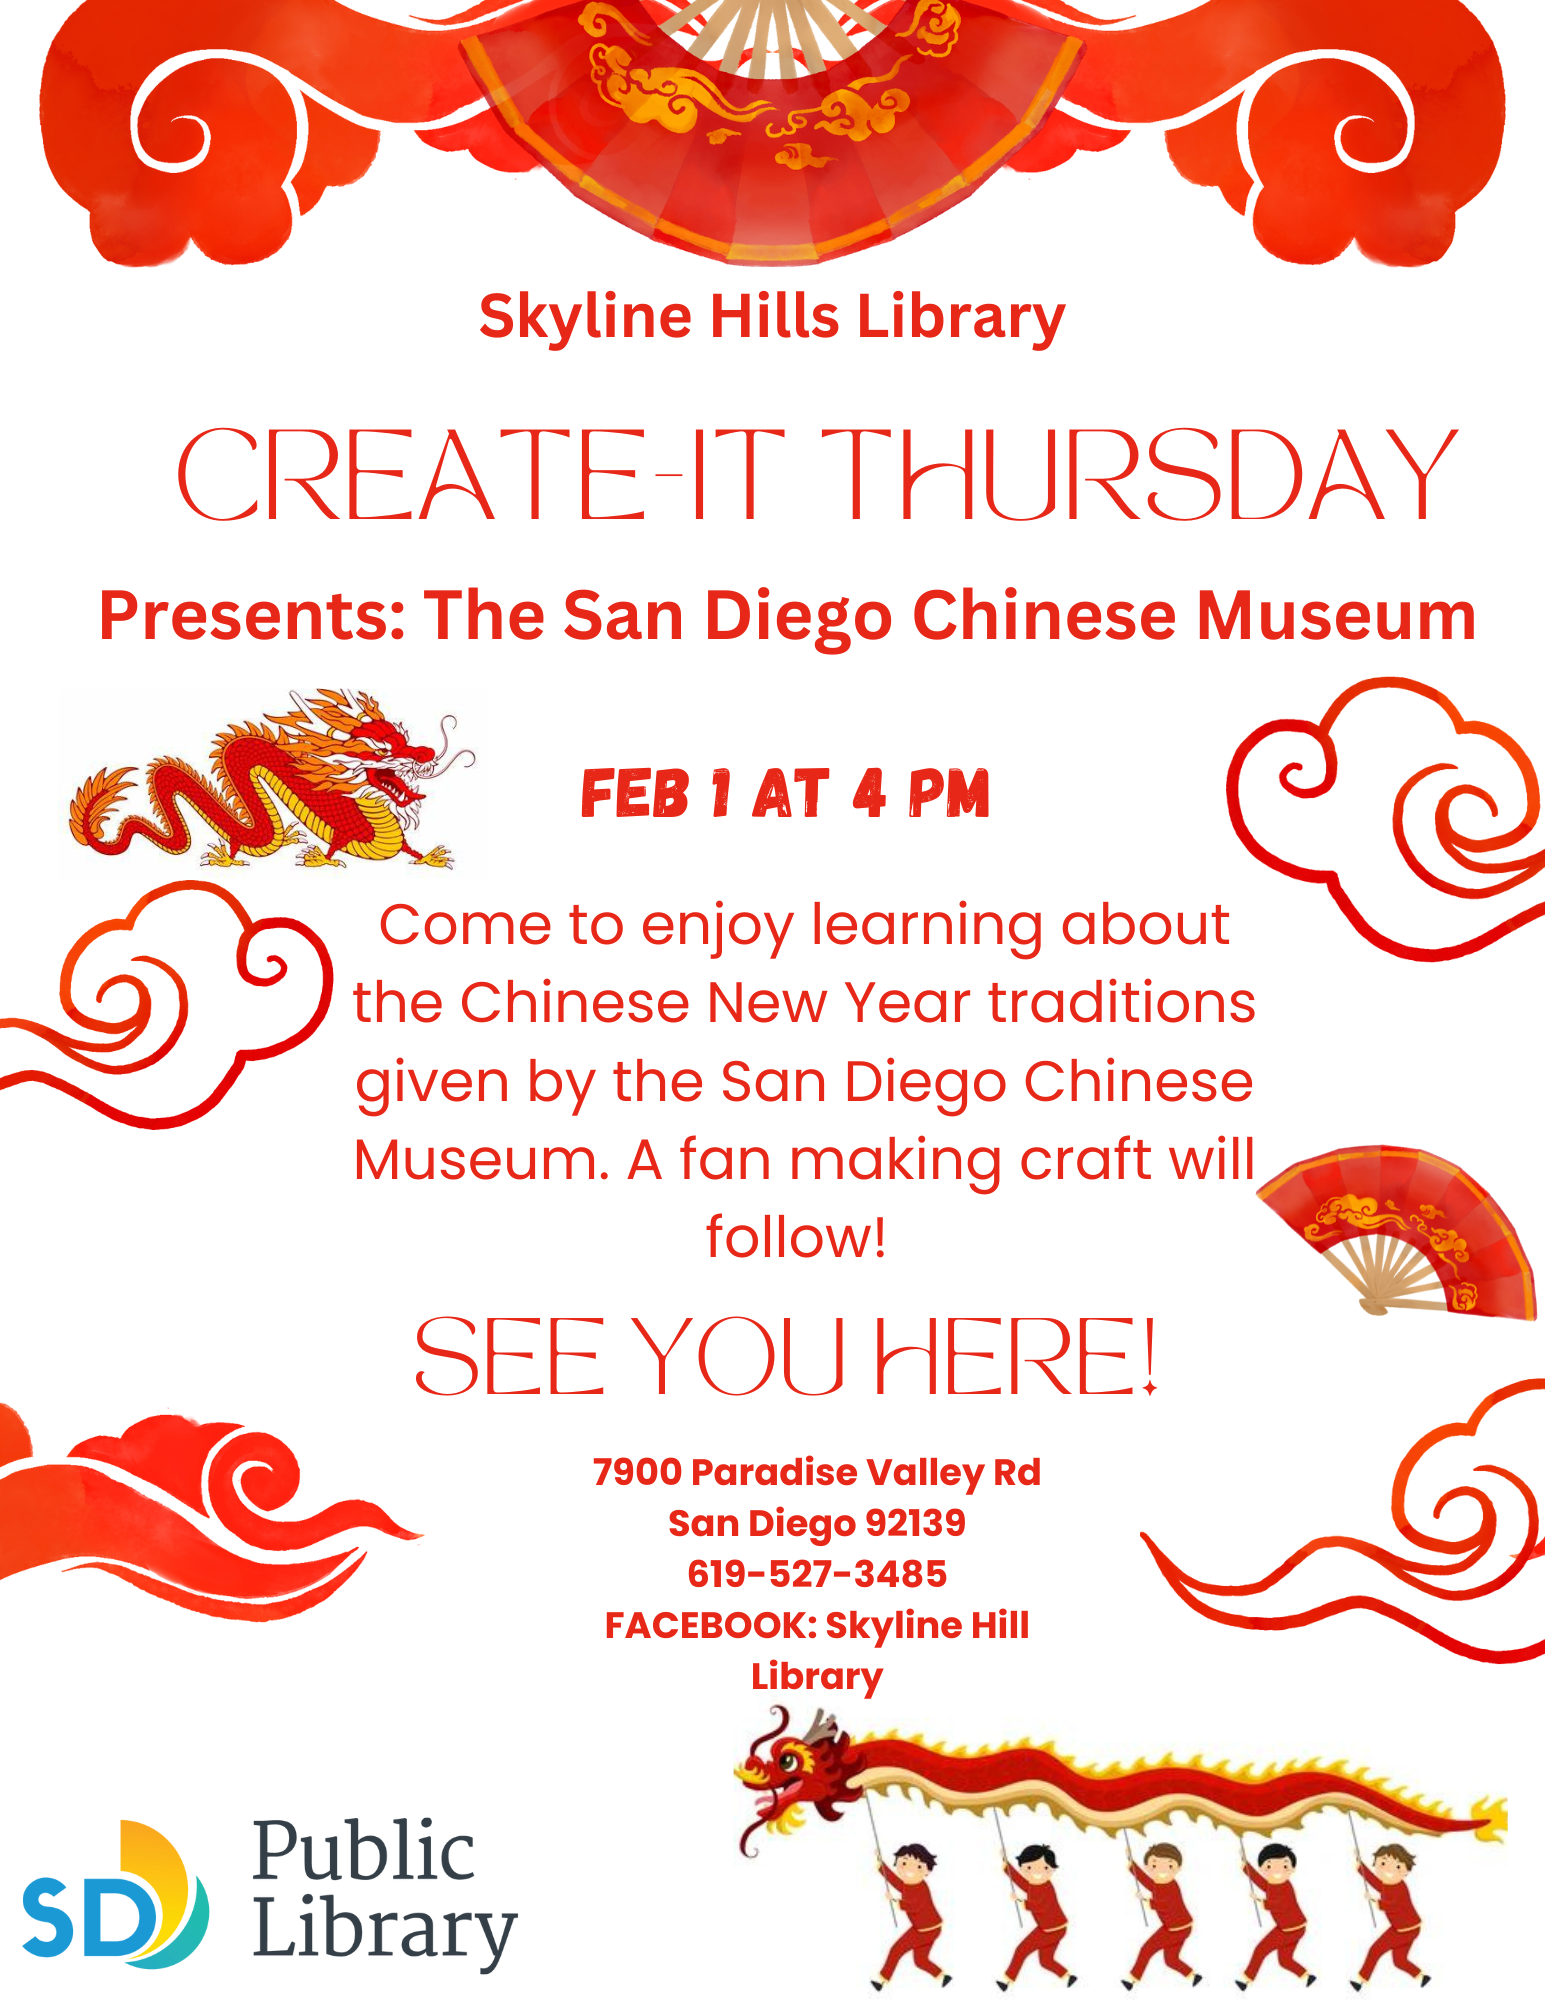 Create-It Thursday presents The San Diego Chinese Museum!